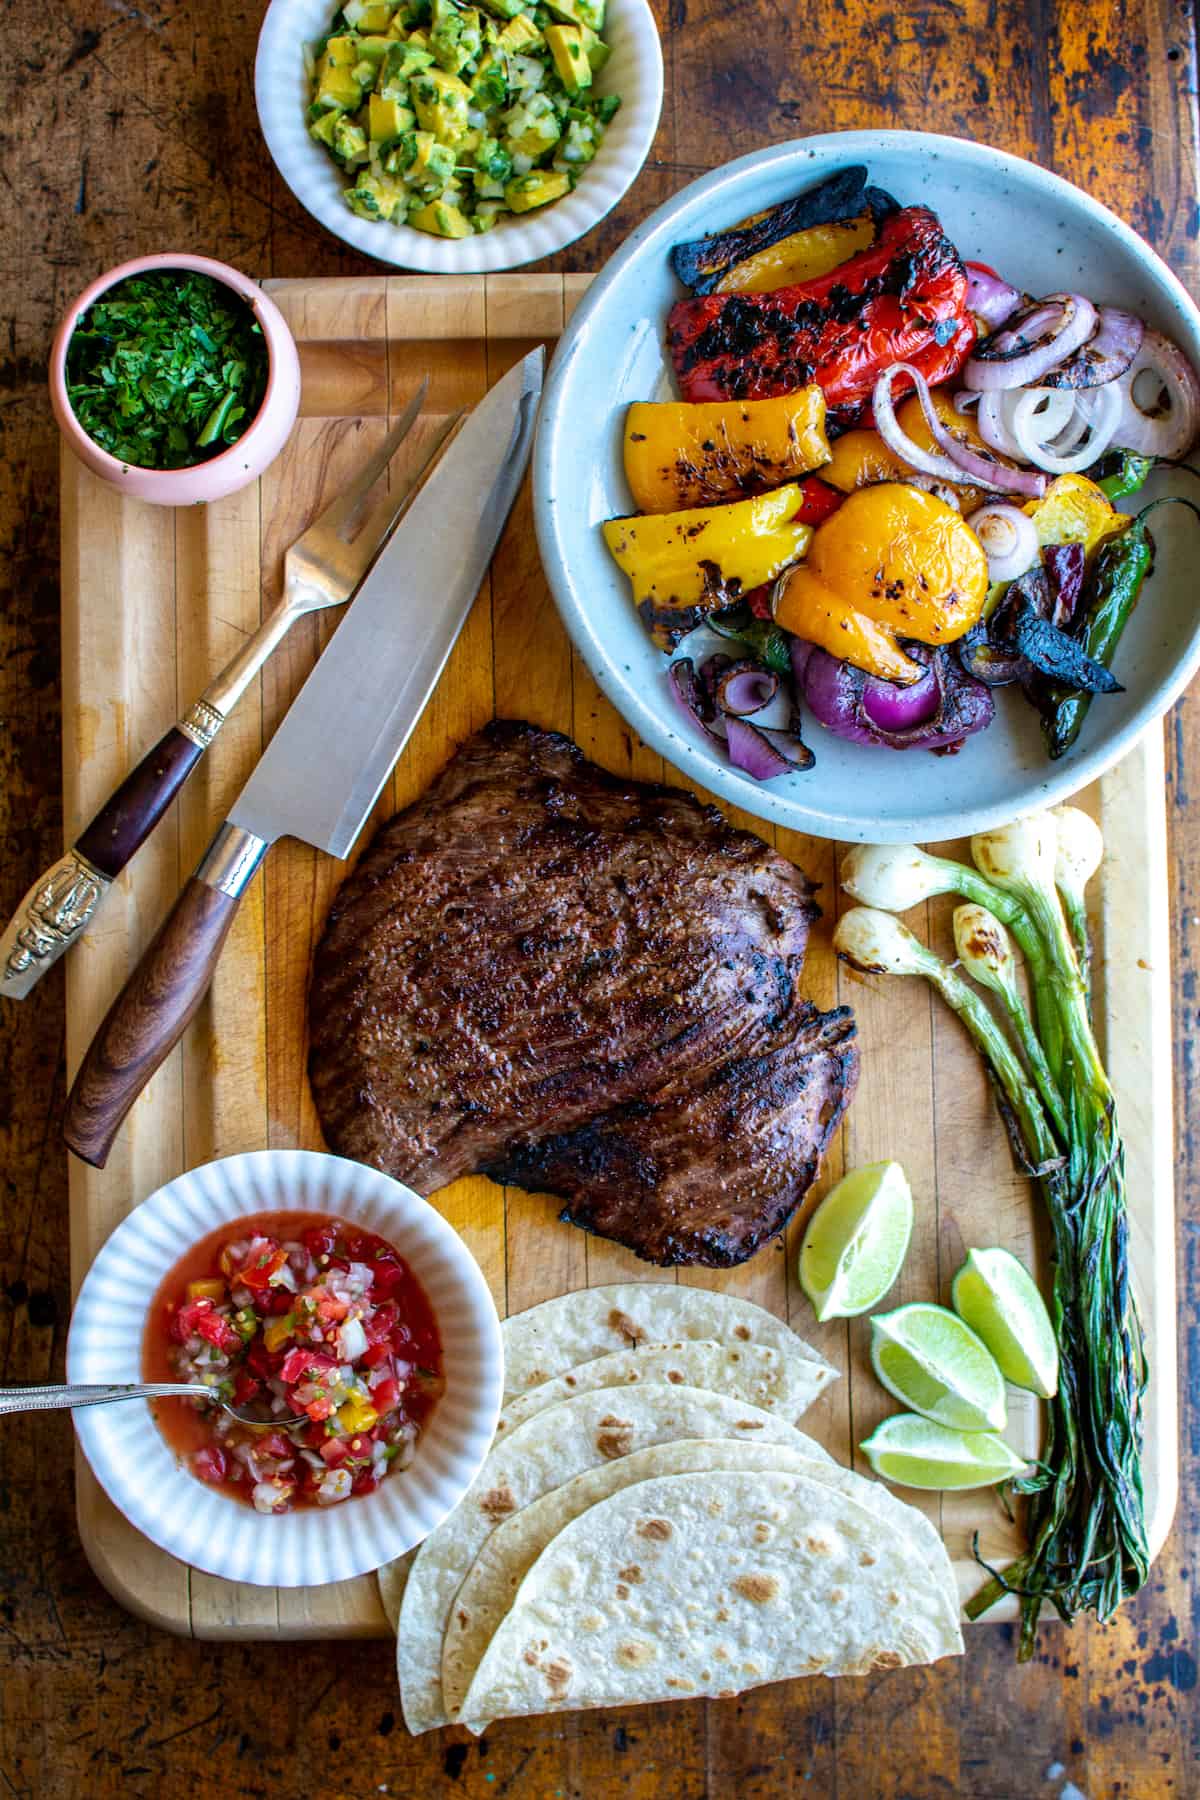 Steak fajitas on a wood cutting board surrounded by pico de Gallo, grilled peppers and onions, flour tortillas, and grilled onions